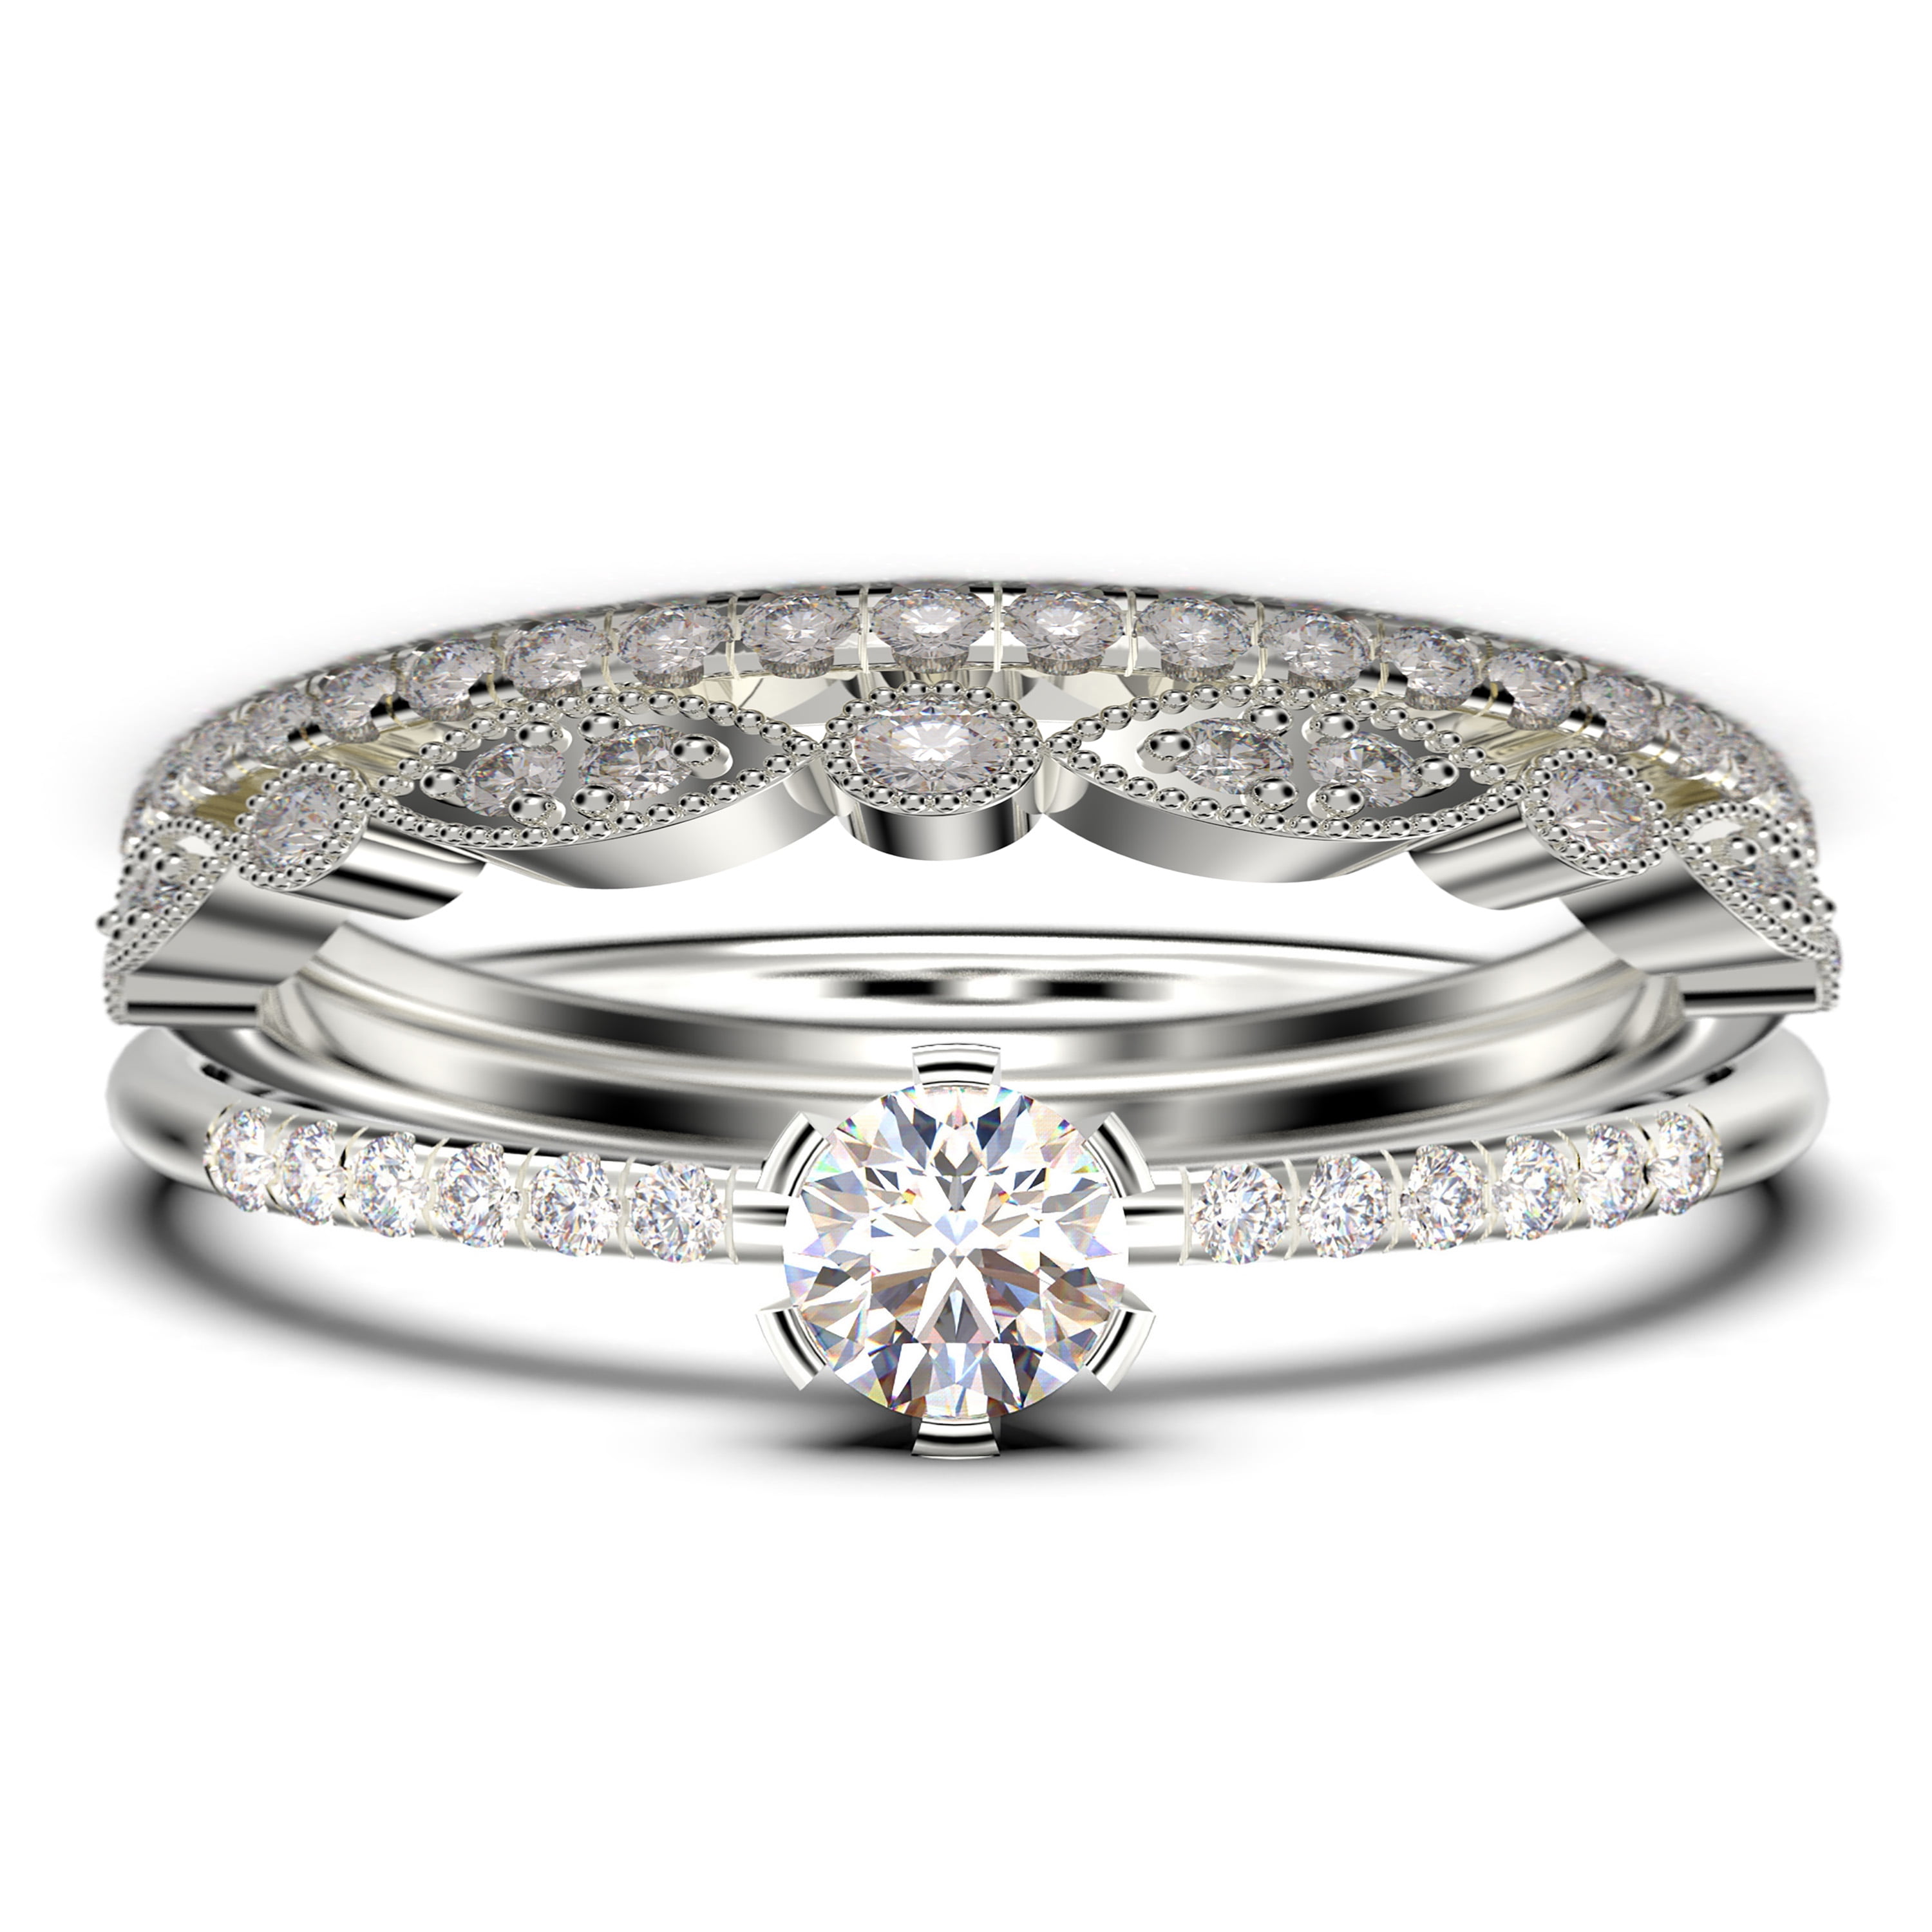 Details about   Ladies Solid 925 Sterling Silver Brilliant White Sapphire 2 Row Eternity Ring 